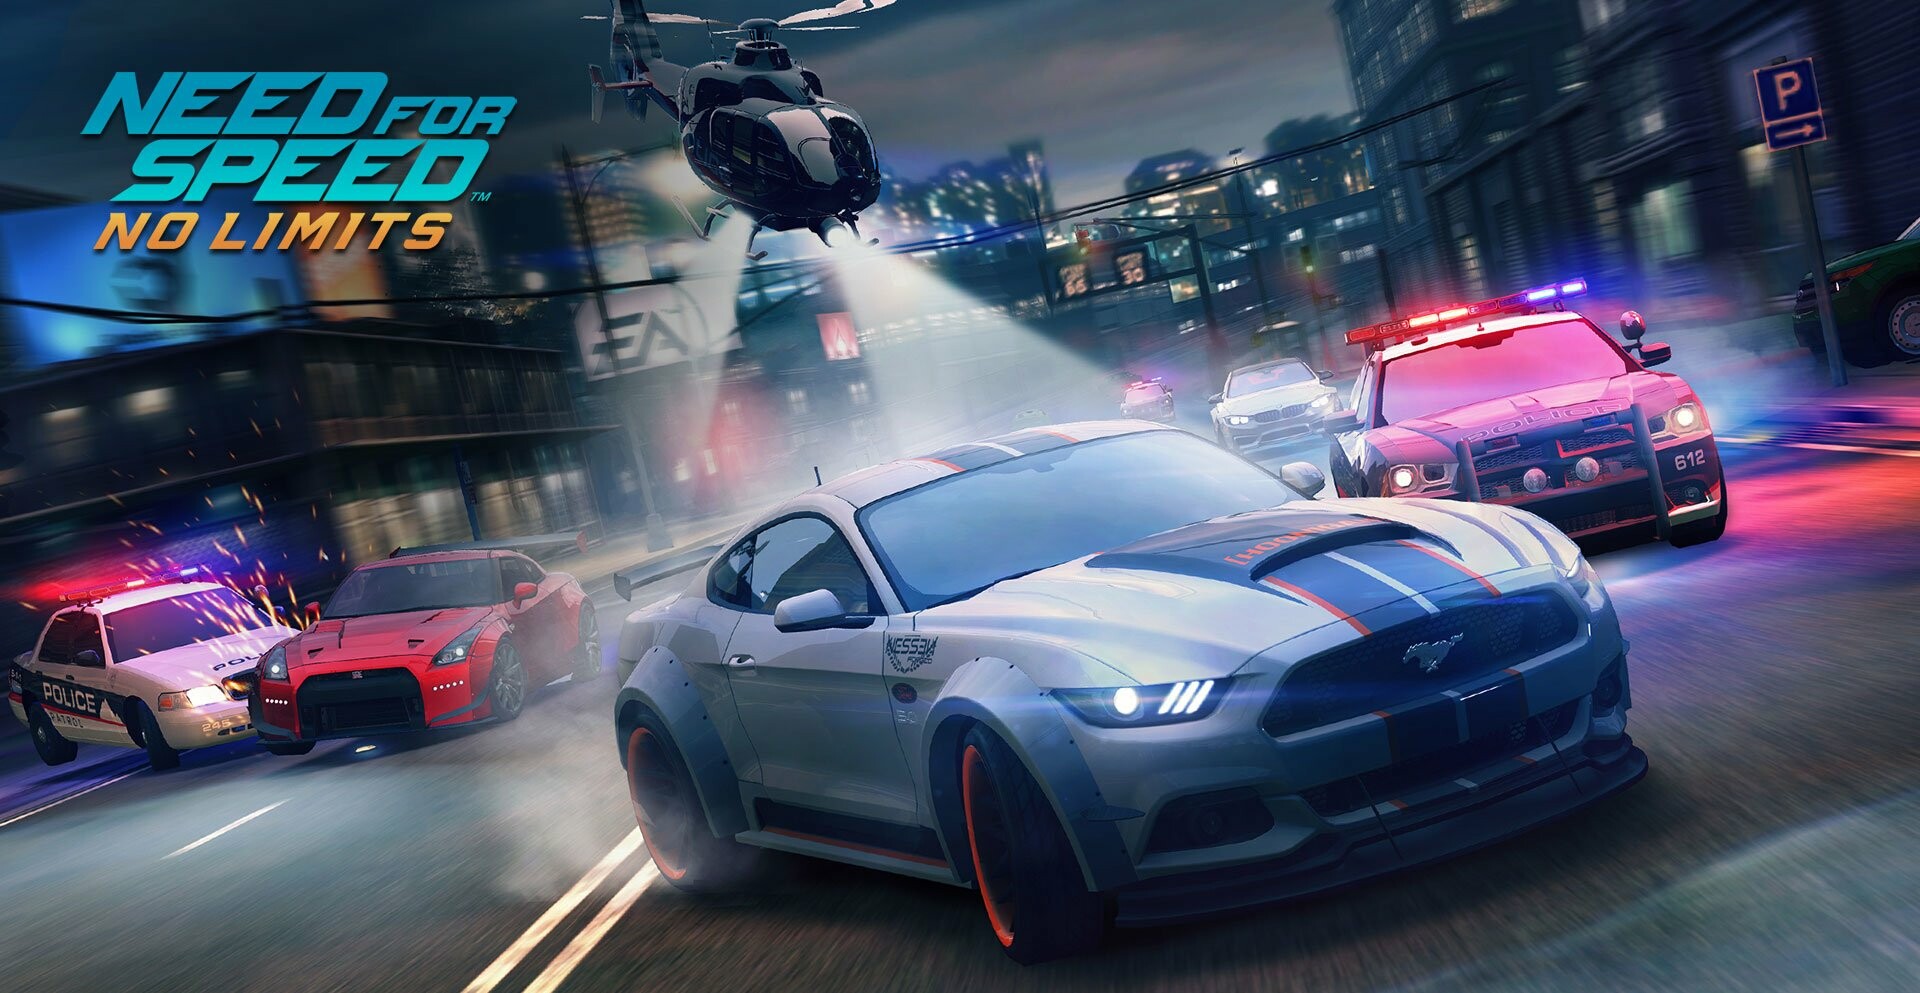 Need for speed wallpaper by Bsubayk  Download on ZEDGE  1287